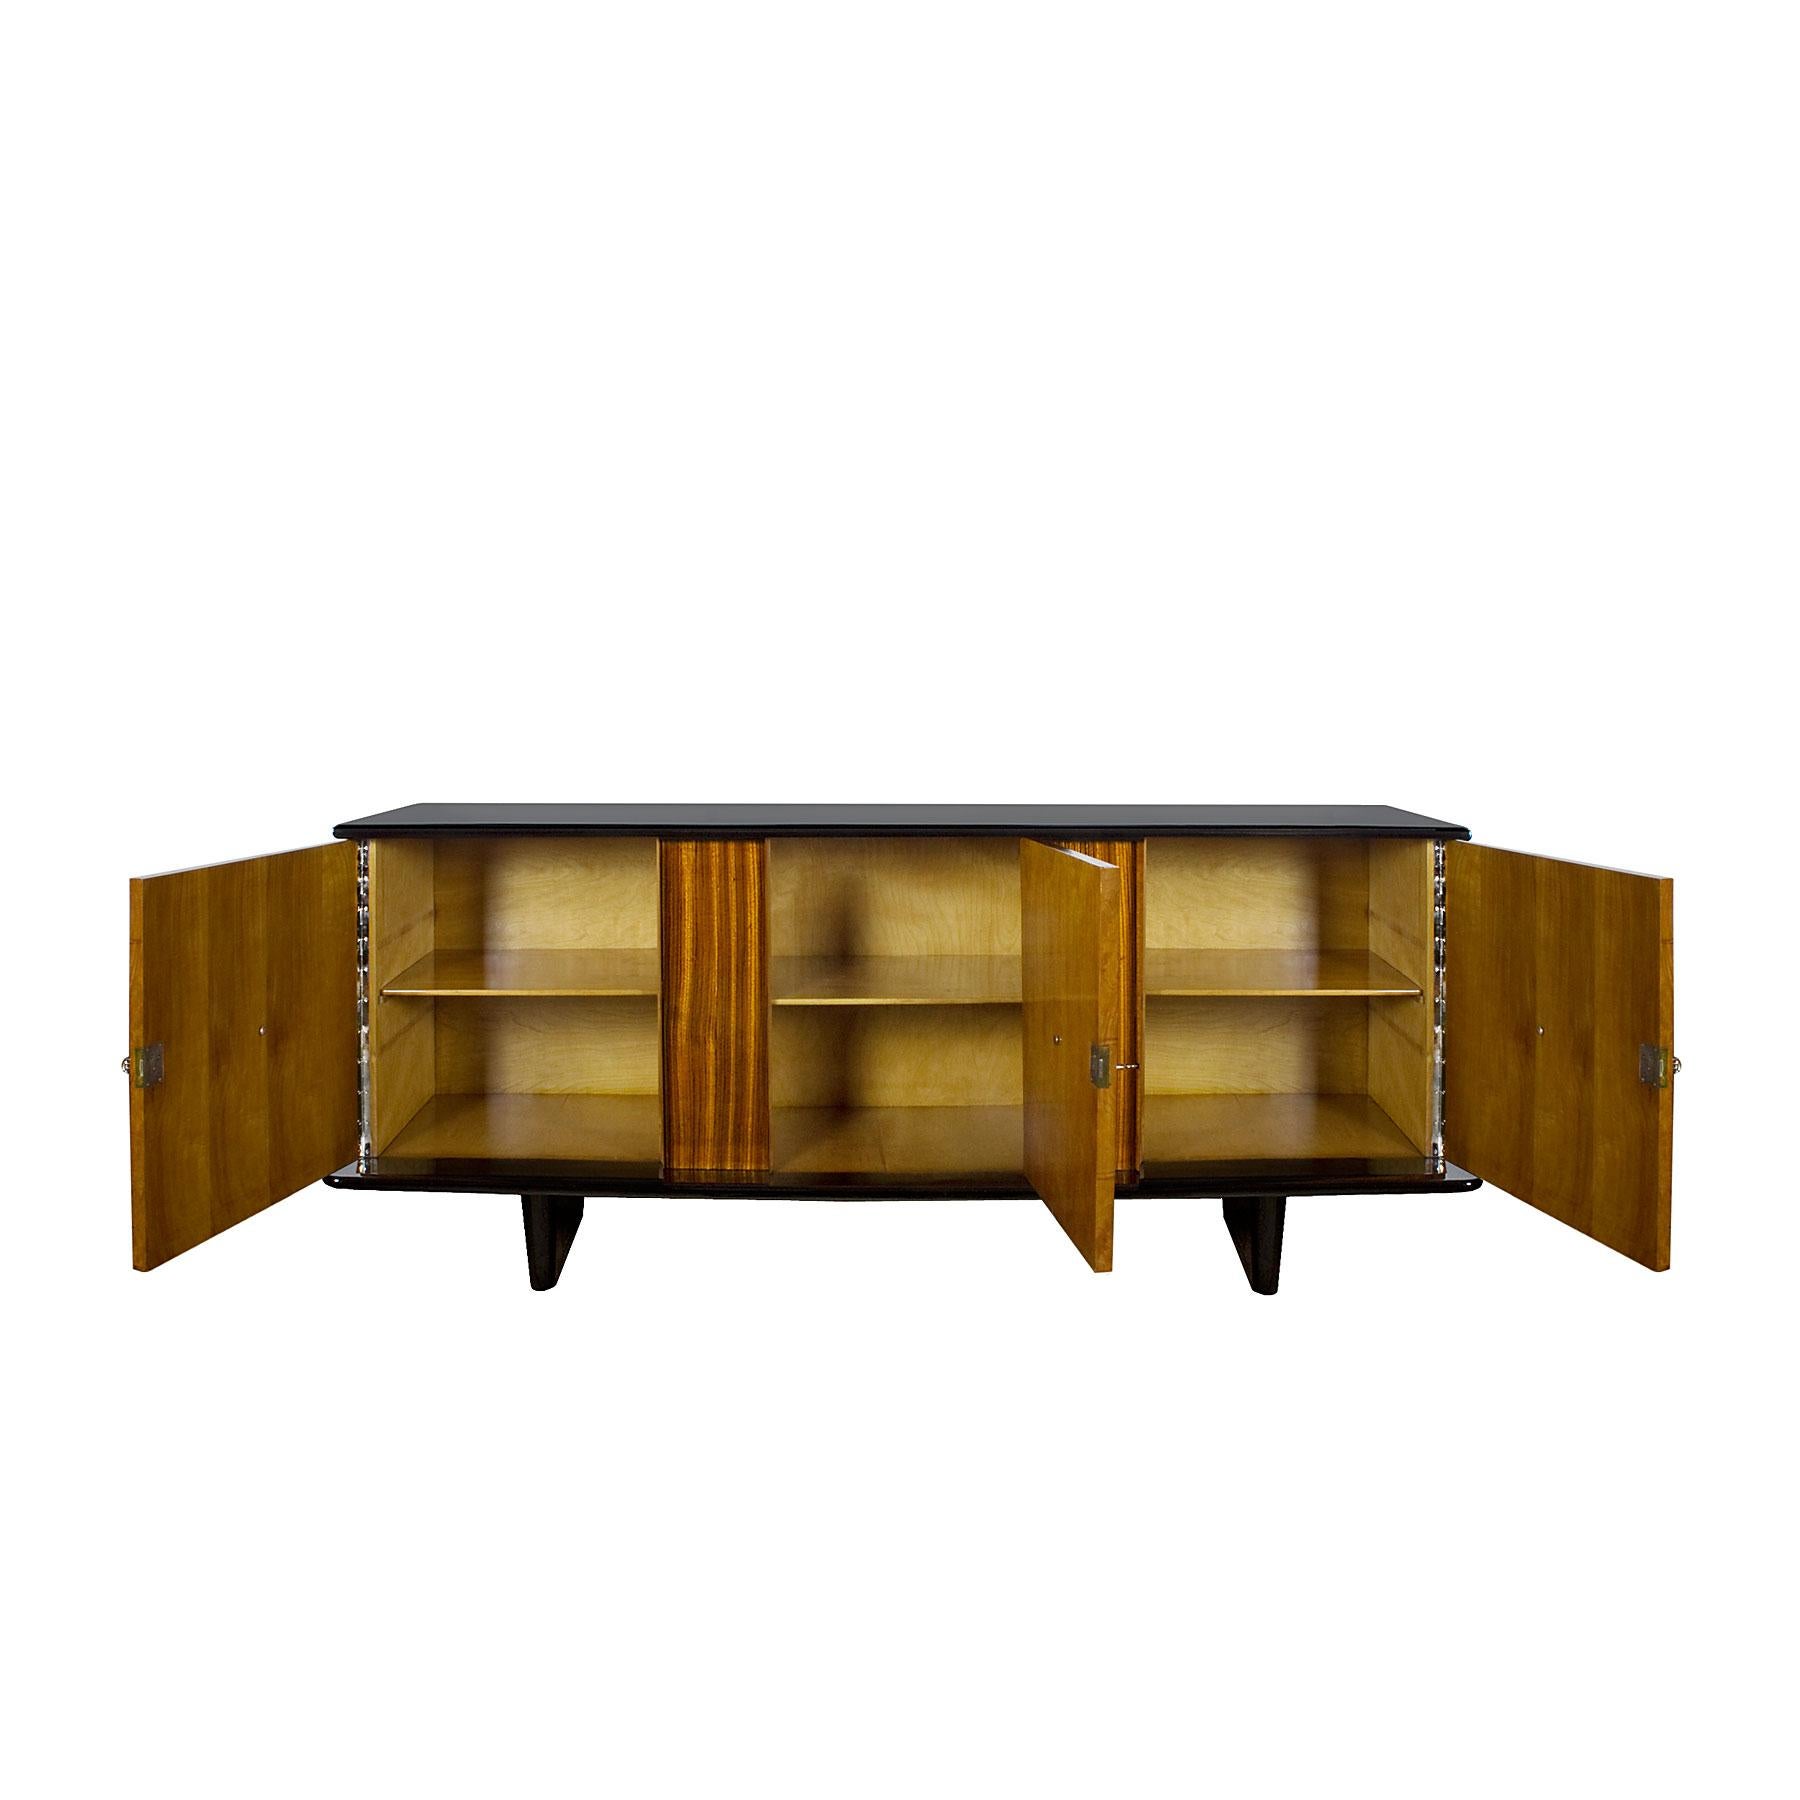 1930s Art Deco Sideboard, Maple, Zebrano, Cherrywood, Black Lacquer - Italy In Good Condition For Sale In Girona, ES